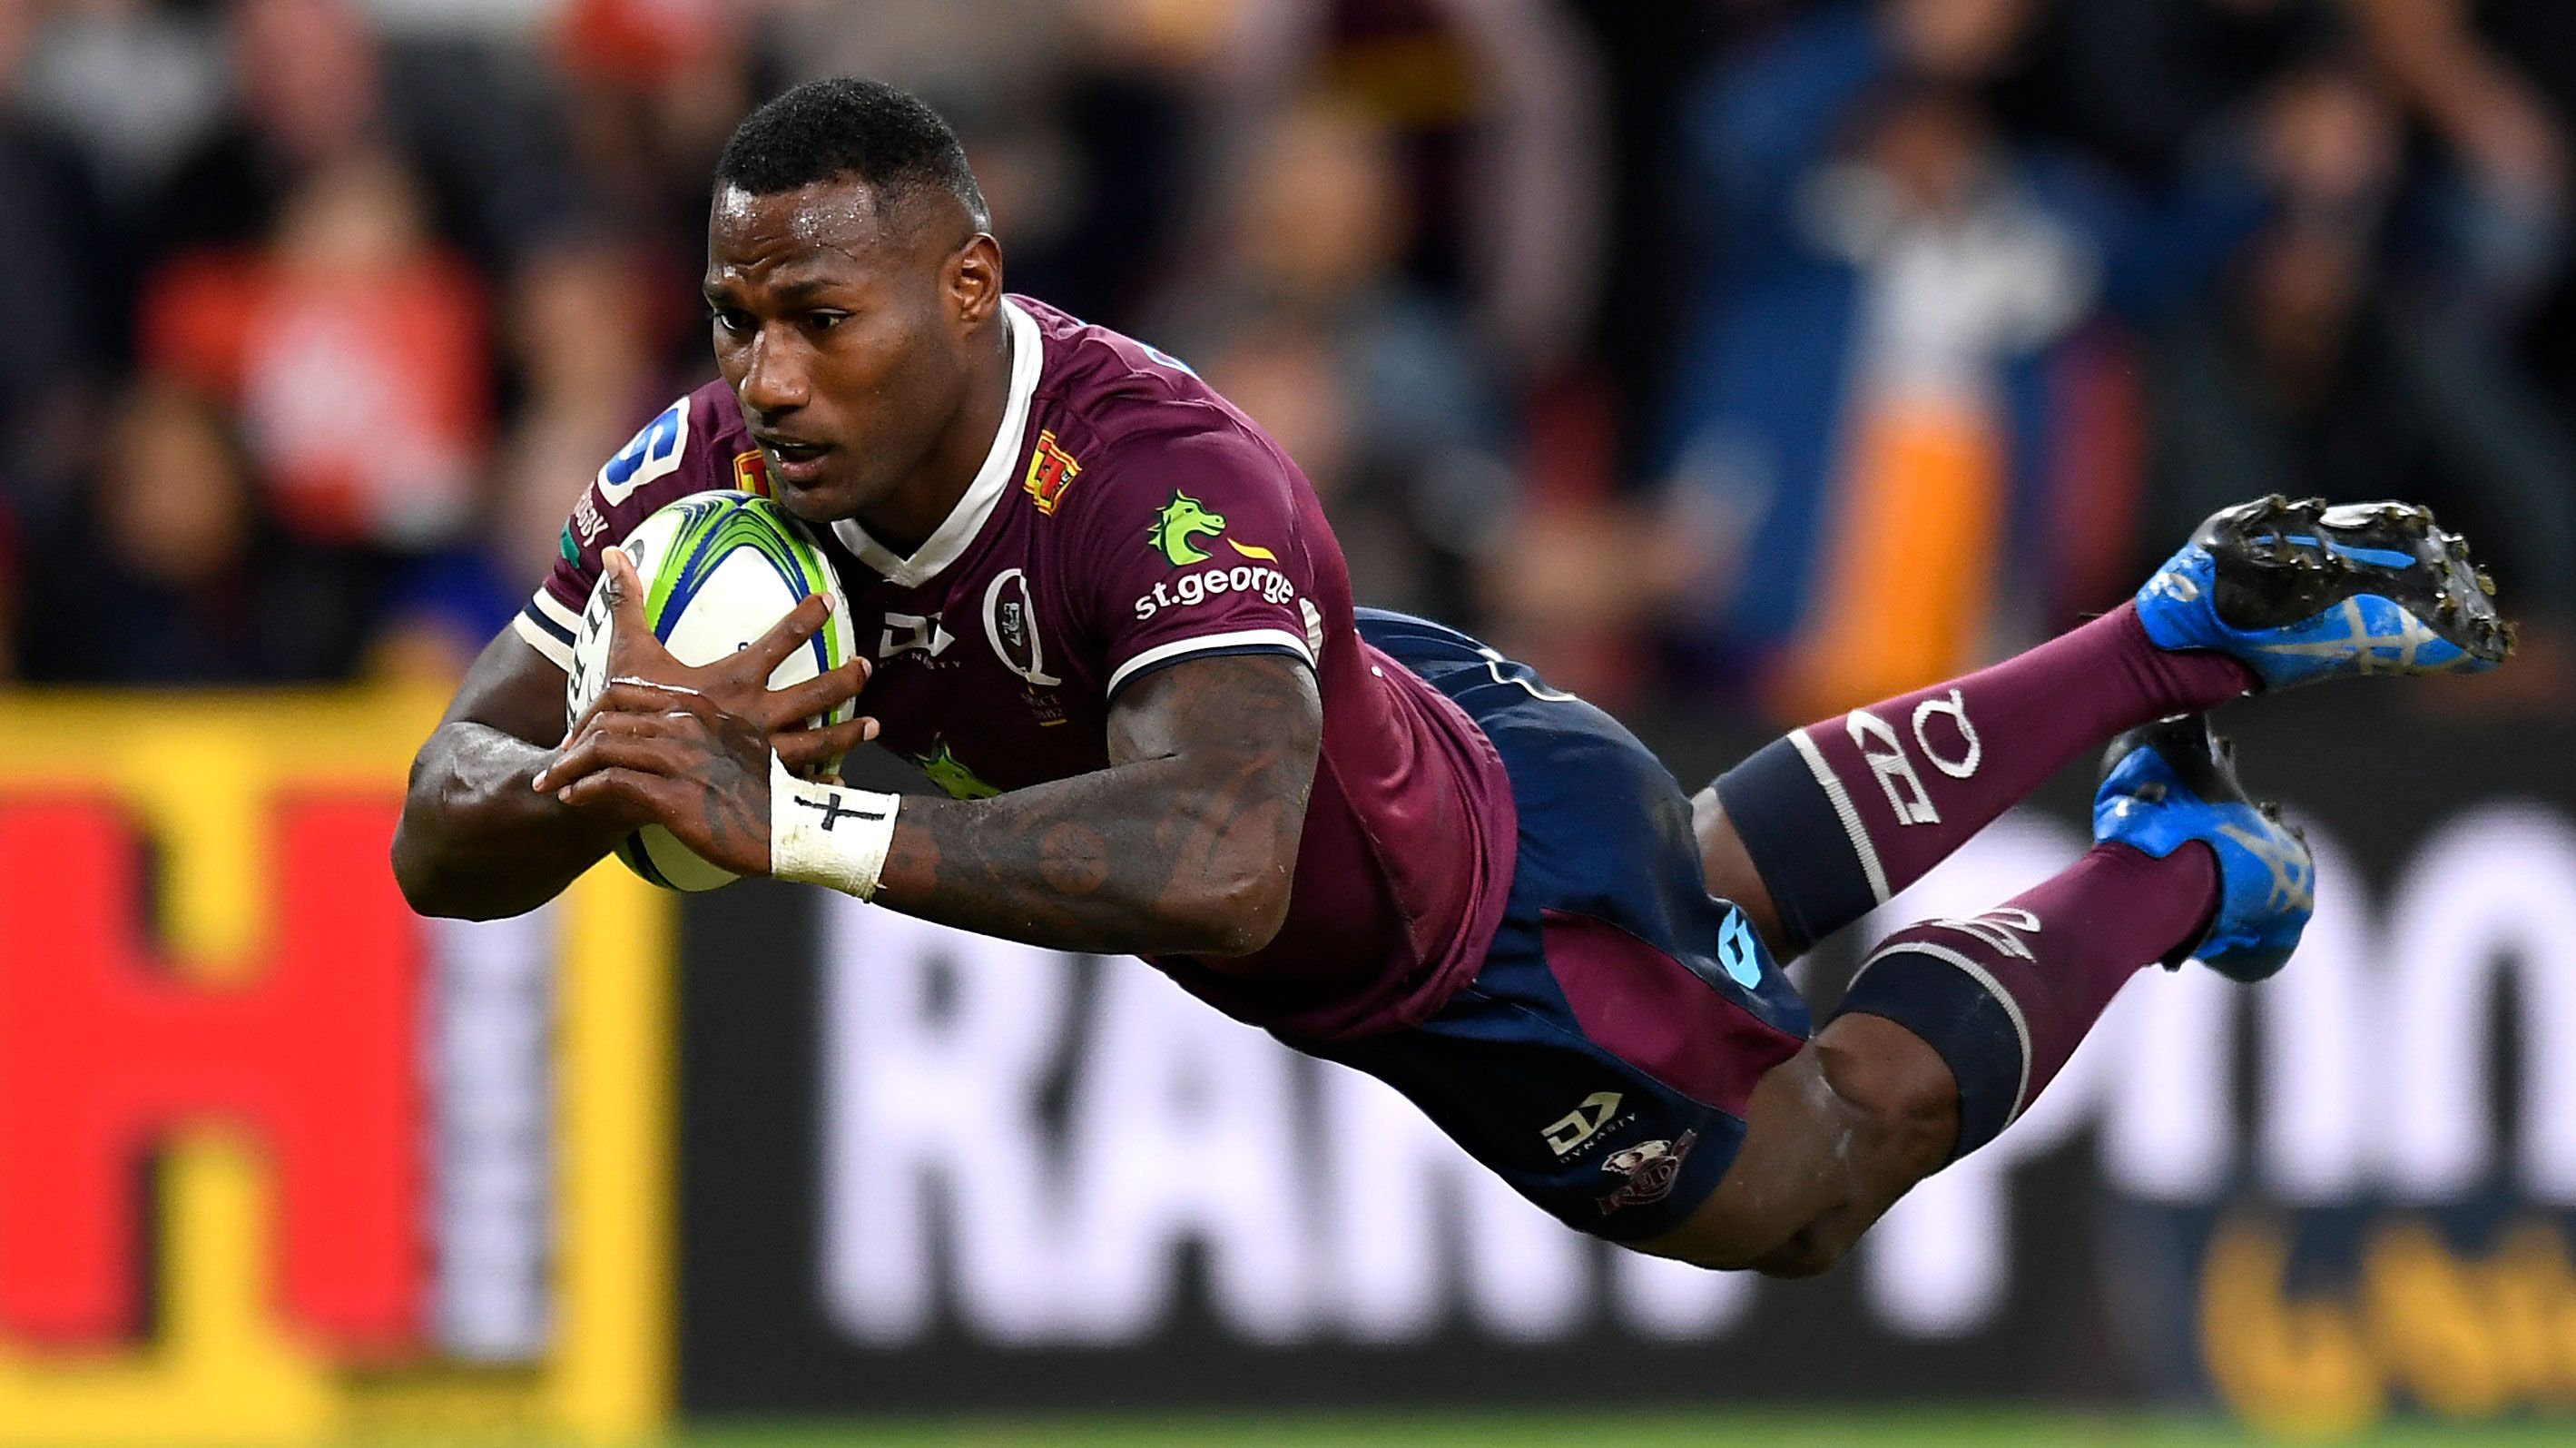 Former NRL star Suliasi Vunivalu named in Wallabies squad to face England